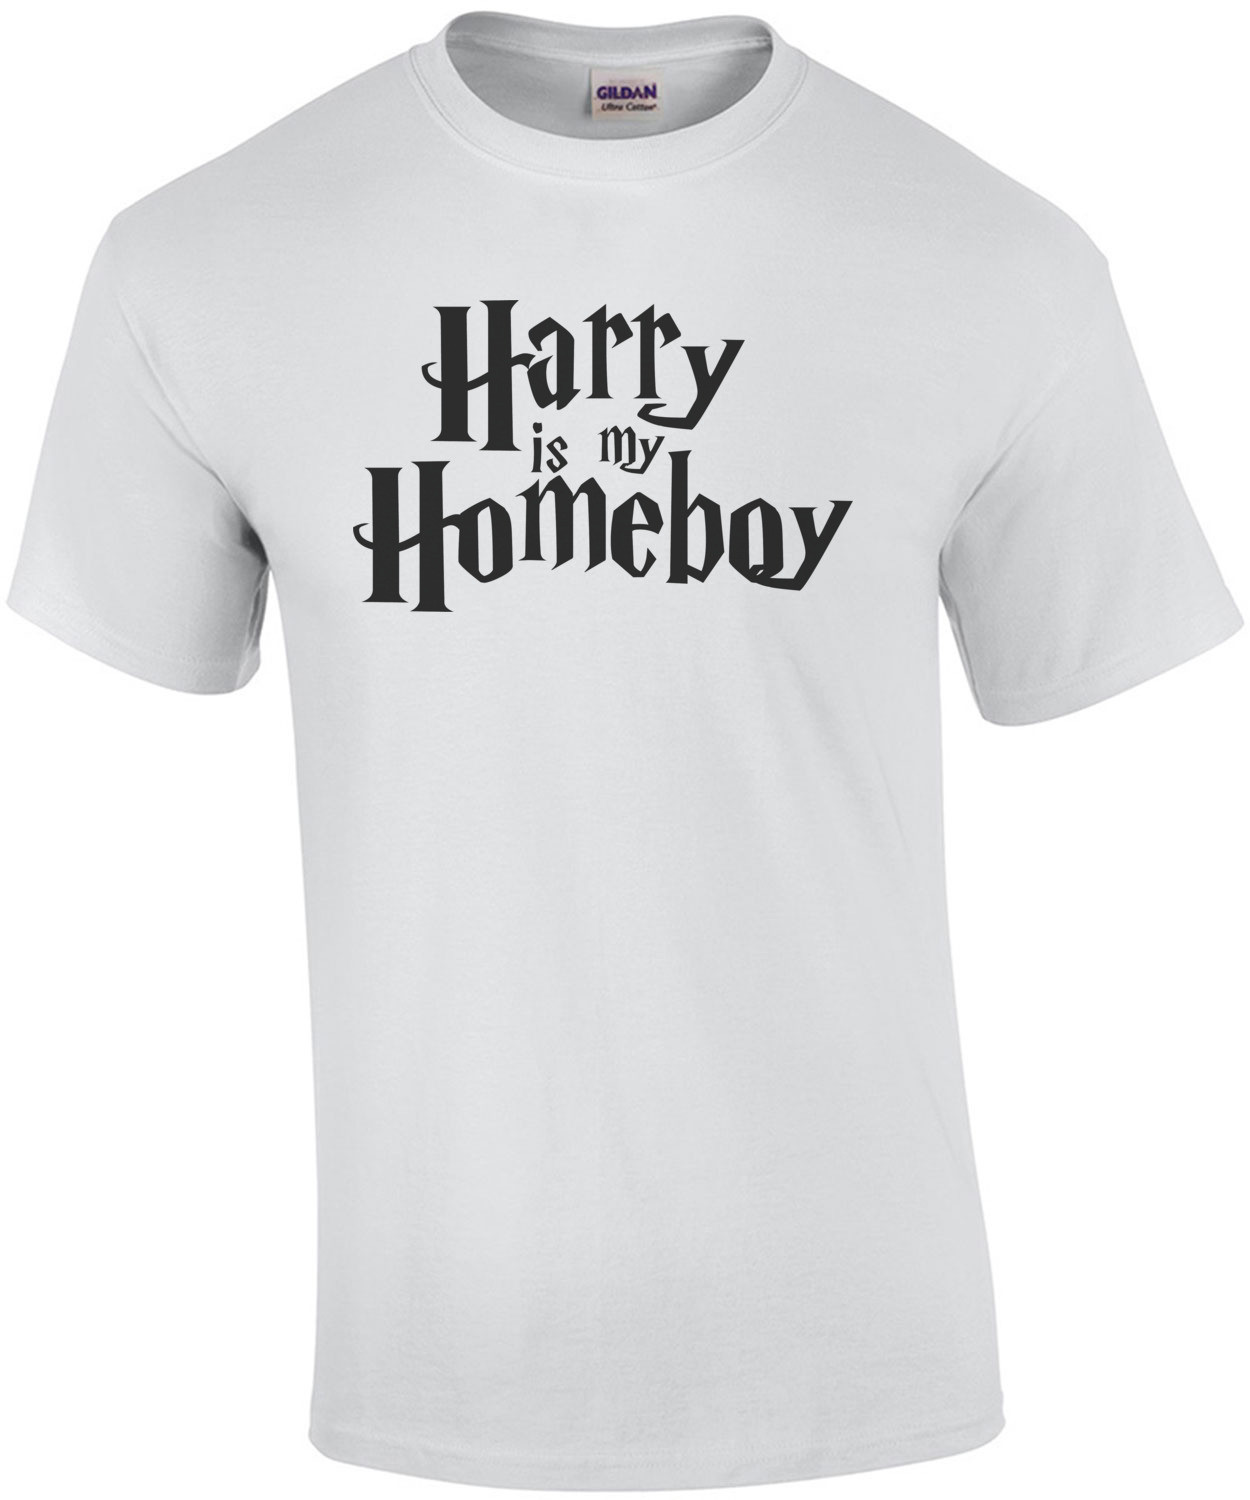 Harry is my homeboy - Harry Potter